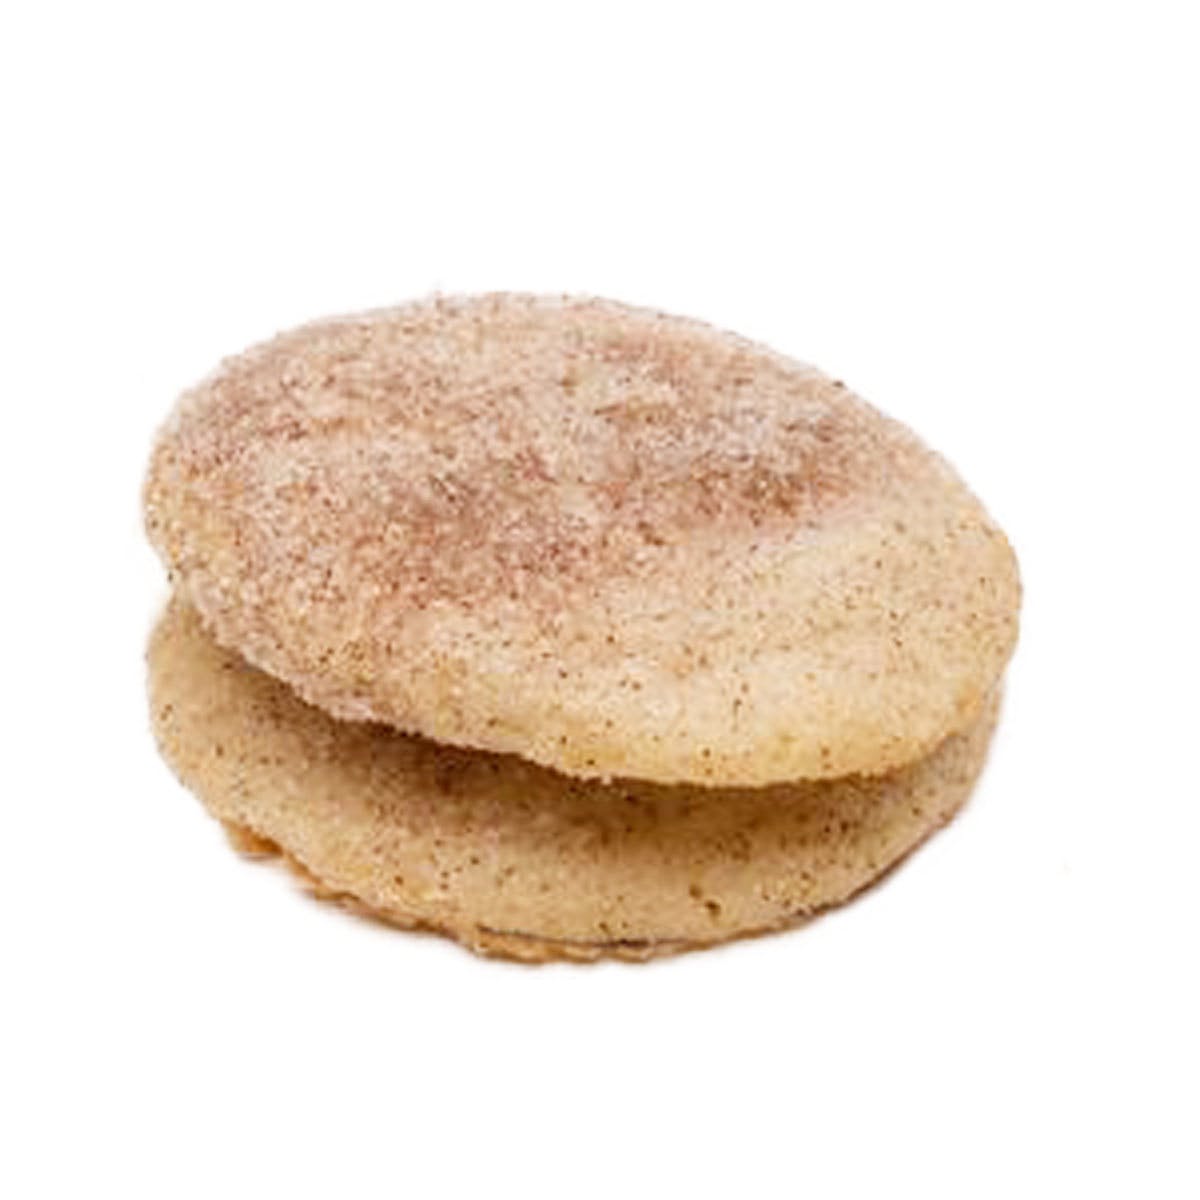 edible-copia-2-pack-snickerdoodle-40-mg